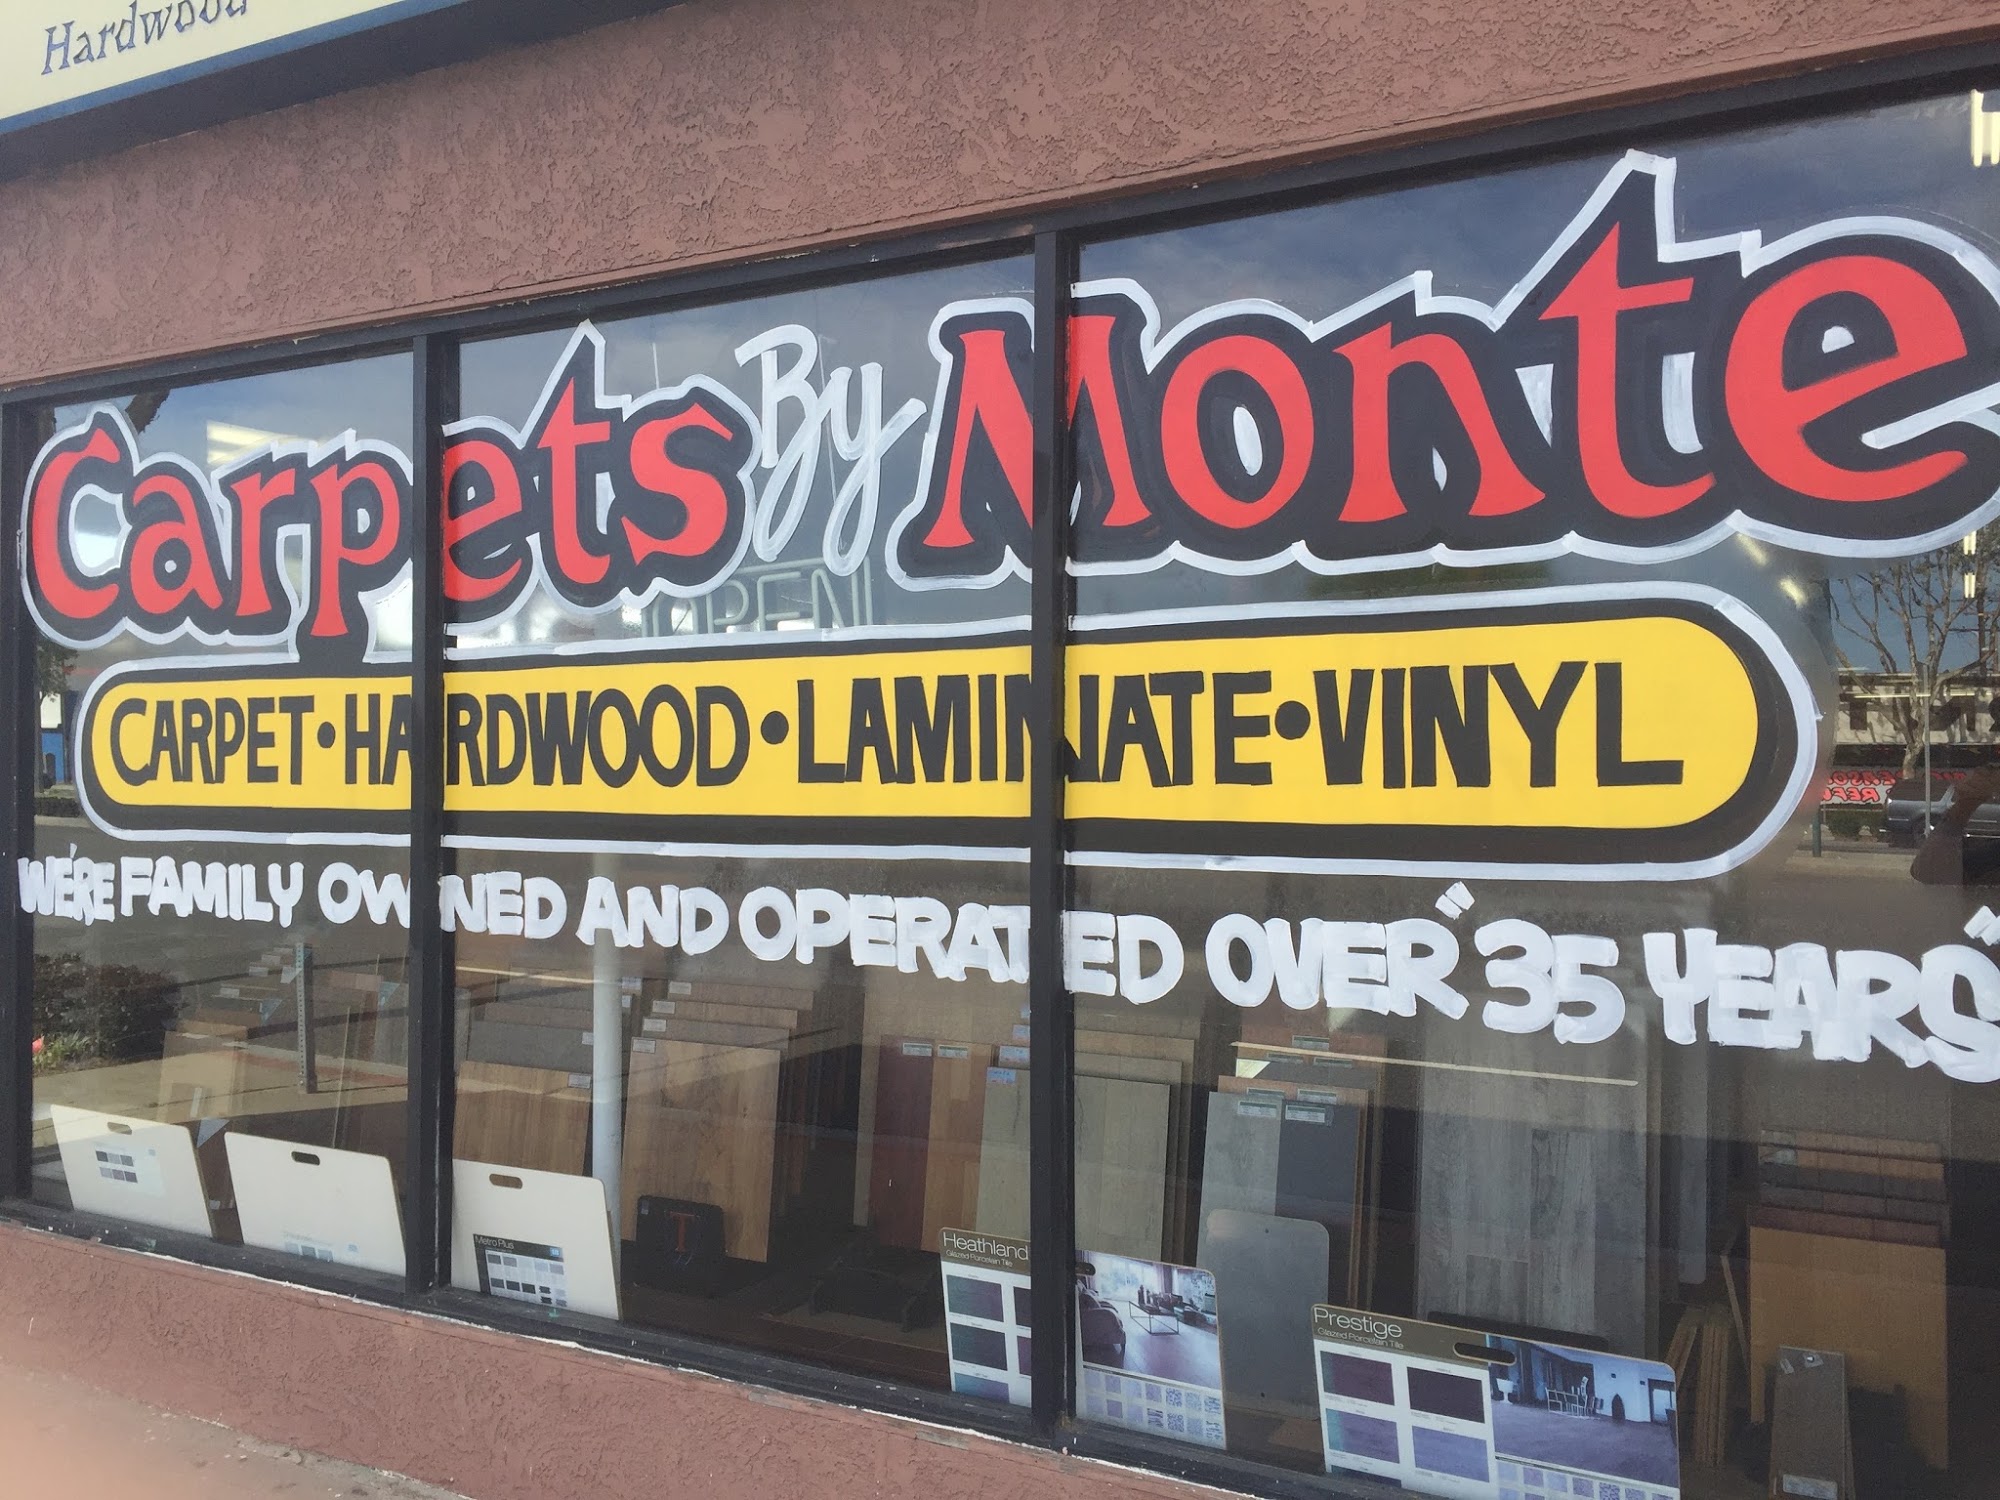 Carpets By Monte